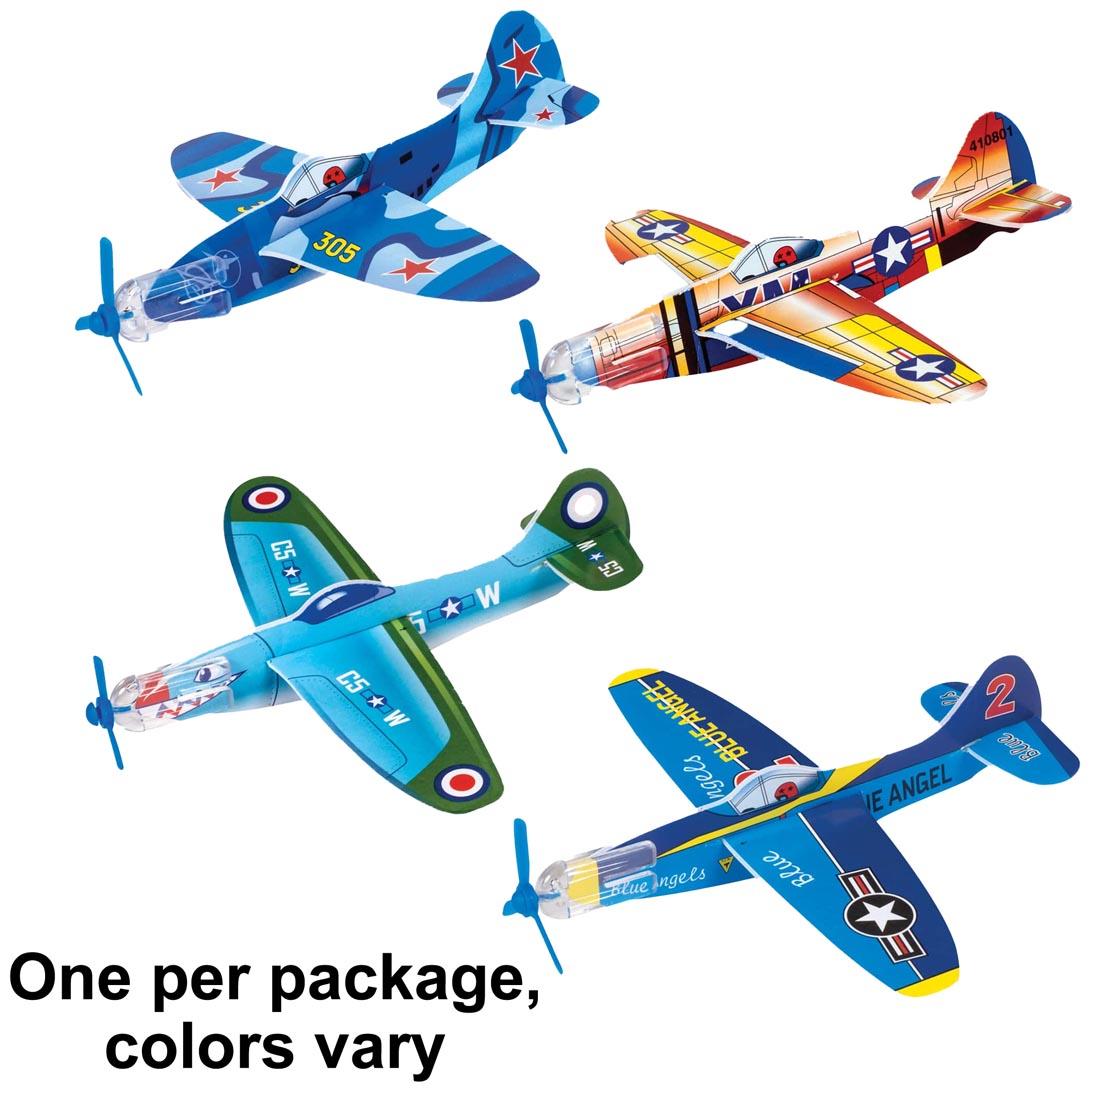 planes from the Retro Glider 4-Pack with the text One per package, colors vary